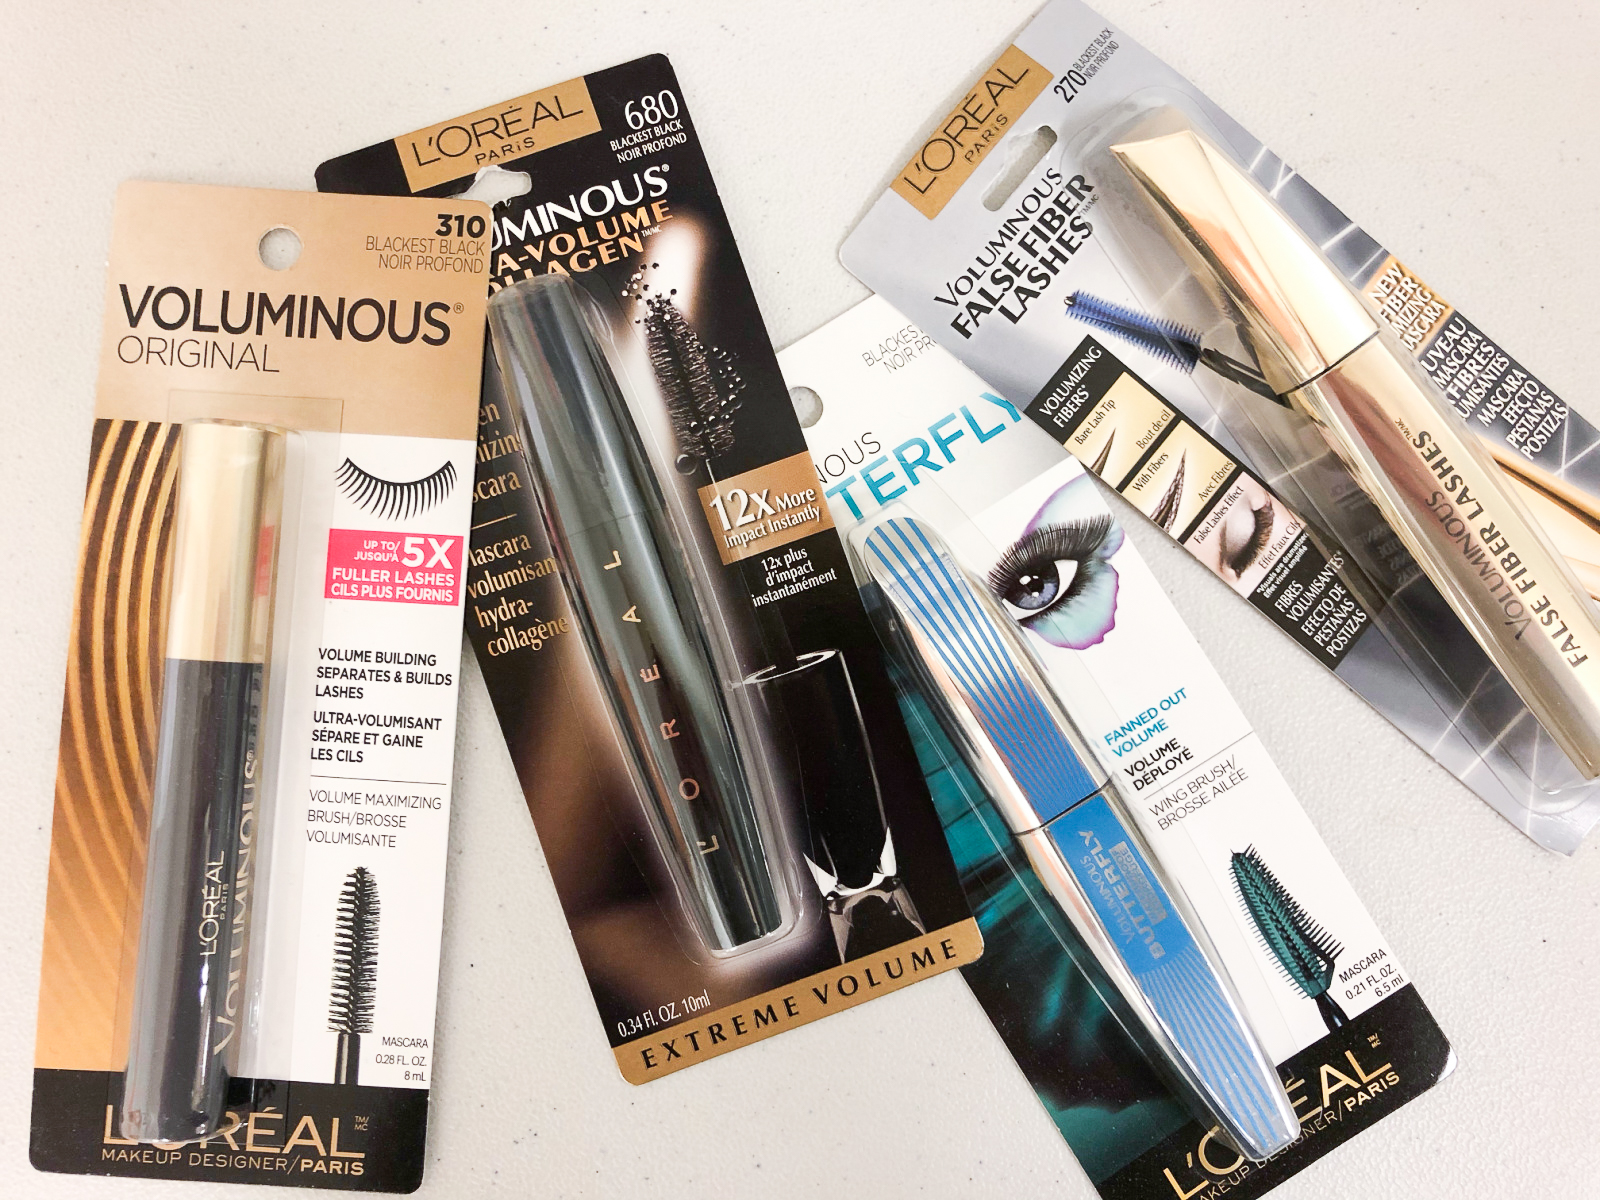 L’Oreal Cosmetics As Low As $3.99 At Publix (Regular Price $8.99)